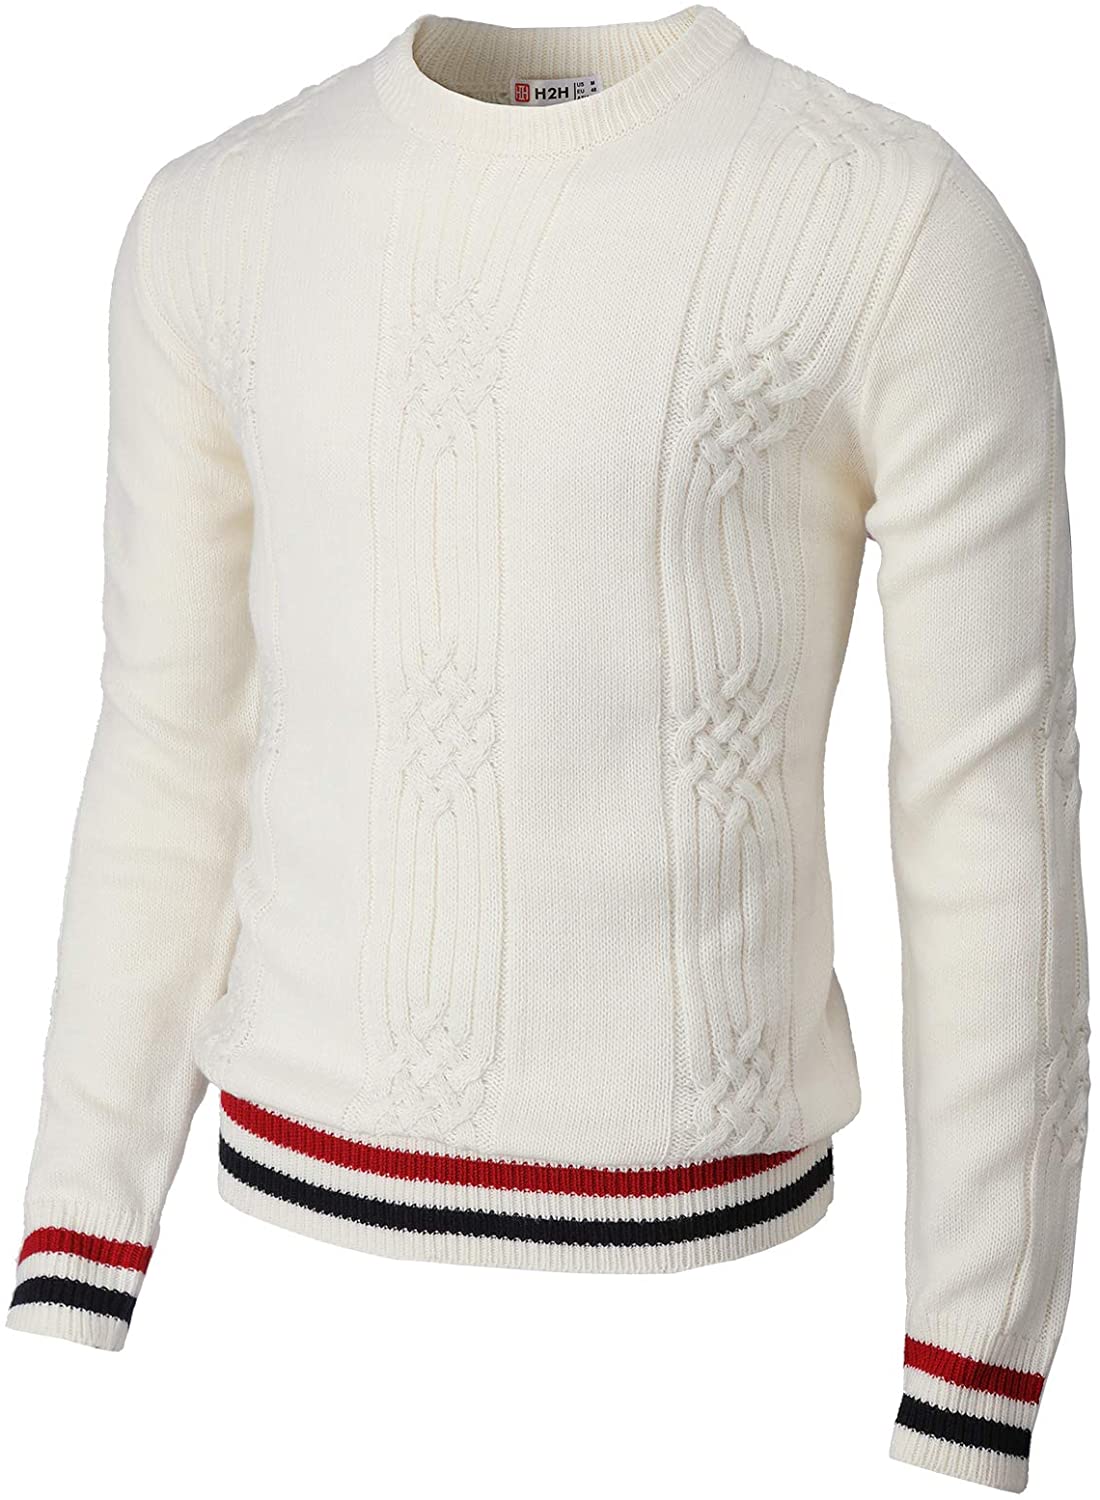 H2H Mens Casual Slim Fit Pullover Turtleneck Sweaters Knitted Long Sleeve Thermal Basic Designed